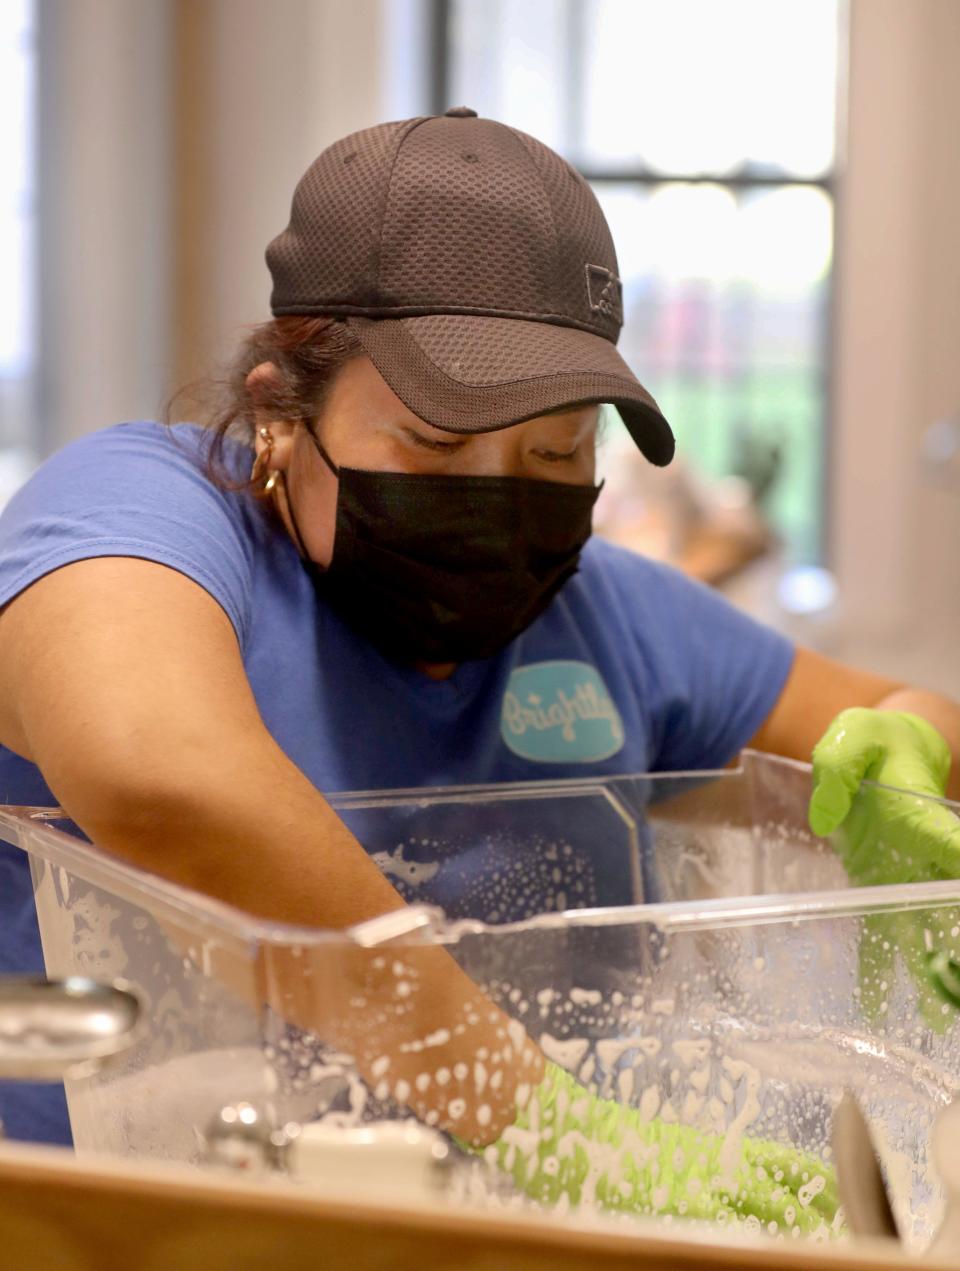 Natavidad Aguilar, a member of the Brightly Cleaning Cooperative, washes a refrigerator container while cleaning a home in Brooklyn March 22, 2022. Brightly is a franchise of worker-owned cooperatives that offers eco-friendly cleaning residential and commercial cleaning services.